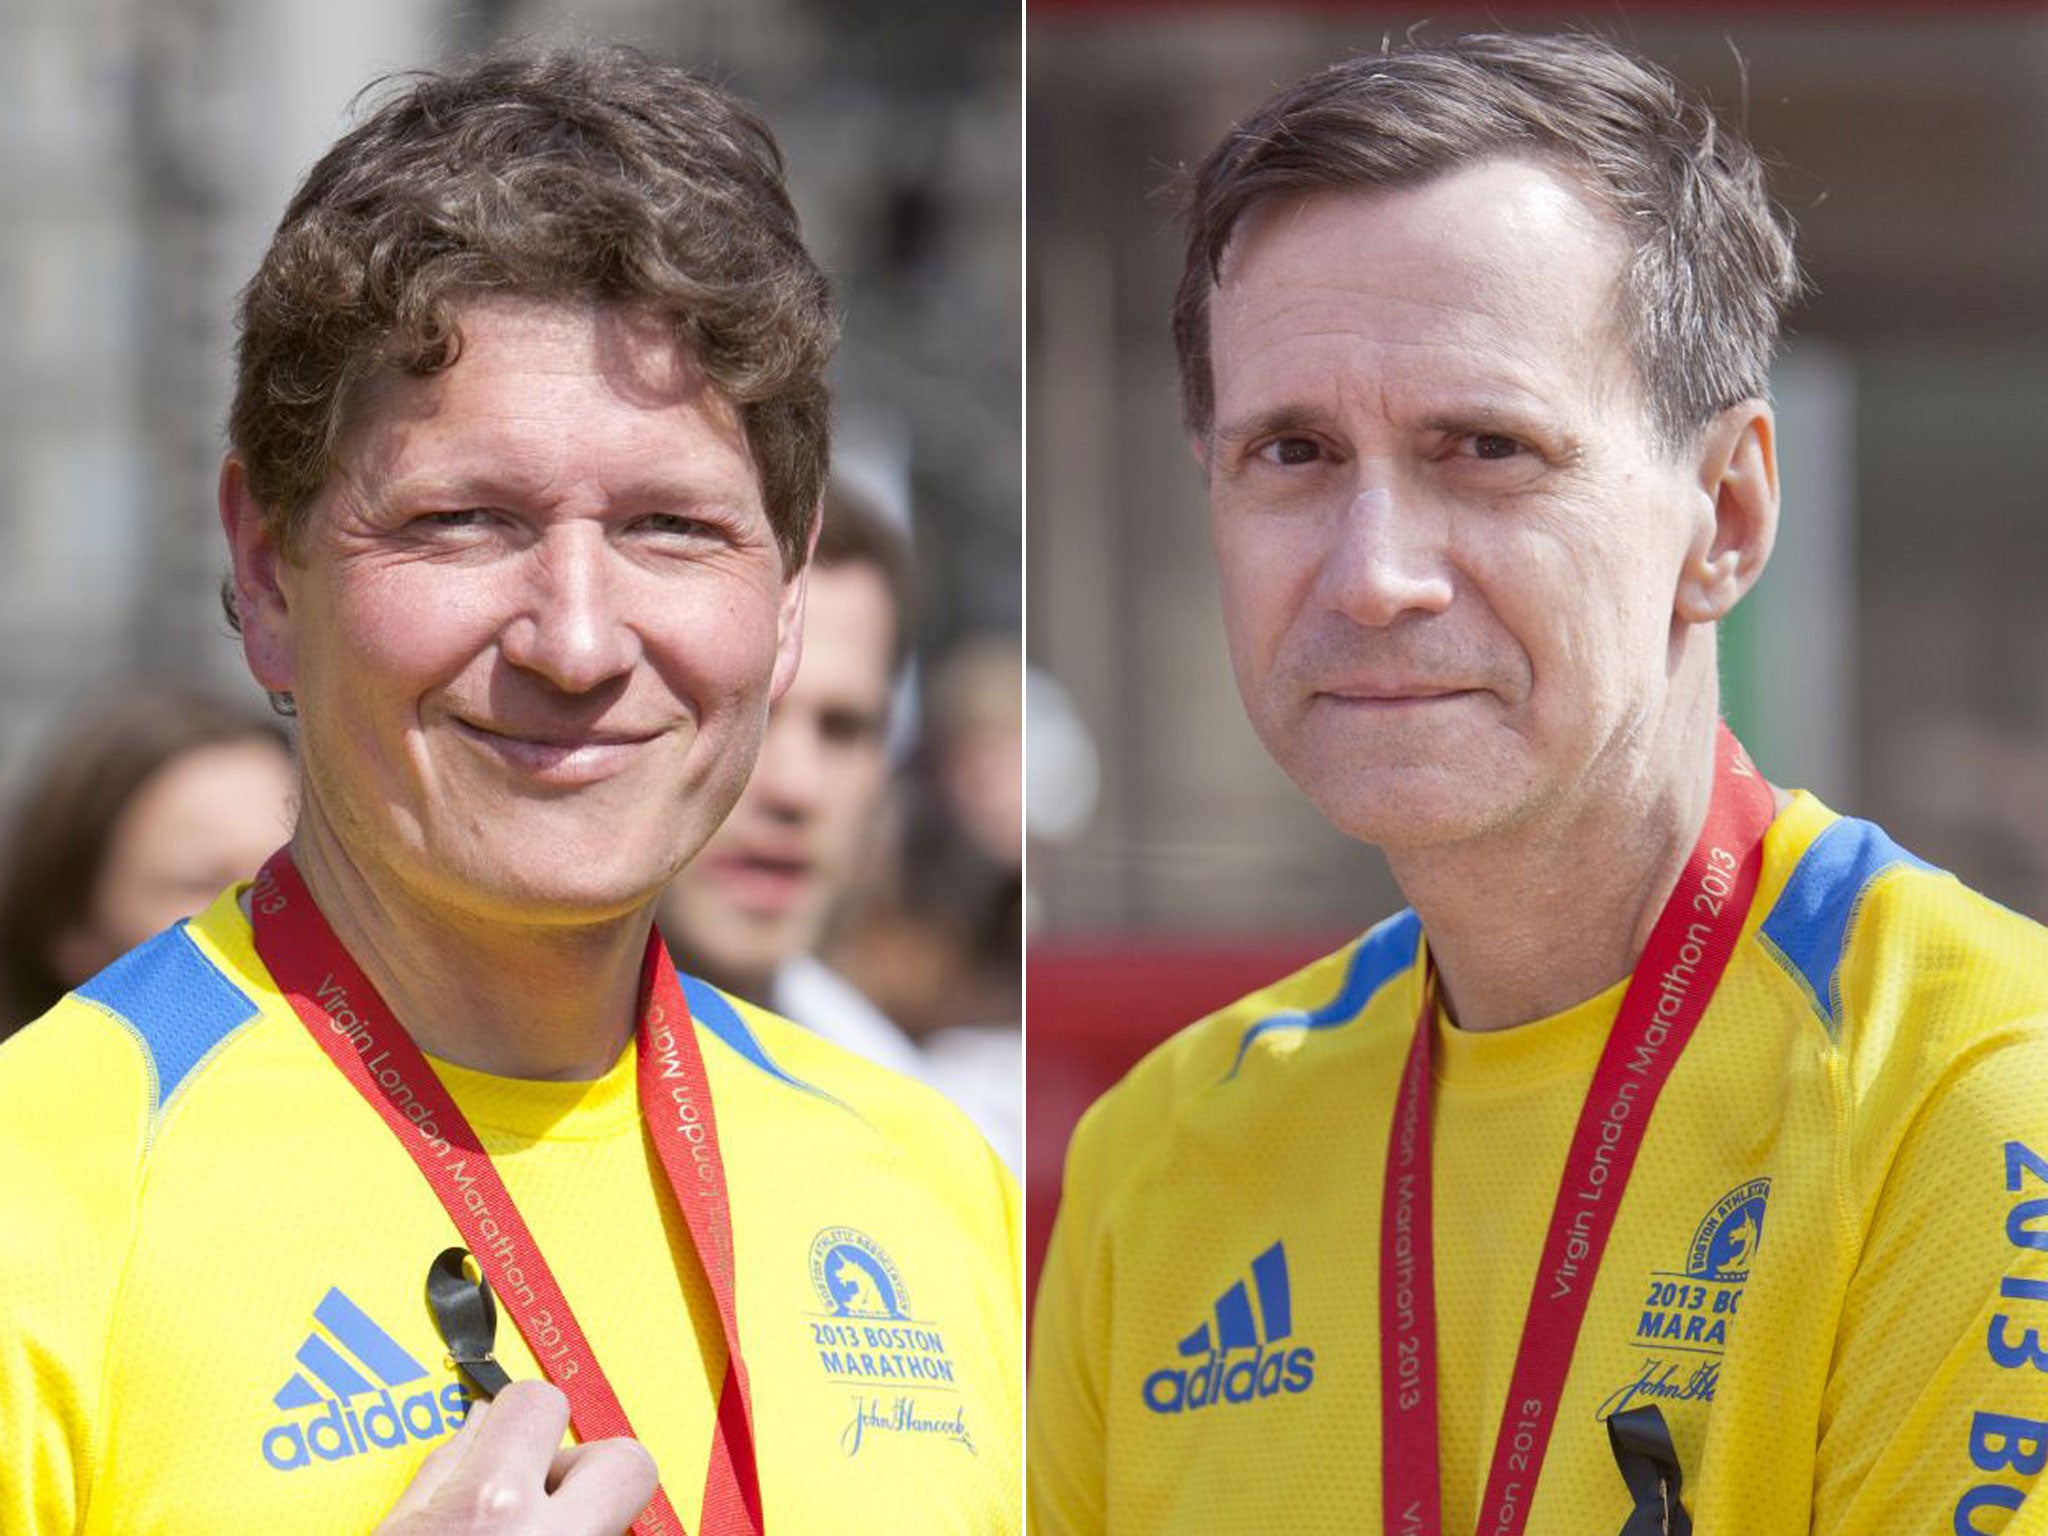 Mike Asche, left and Paul Arlt, right, both ran the Boston and London Marathons